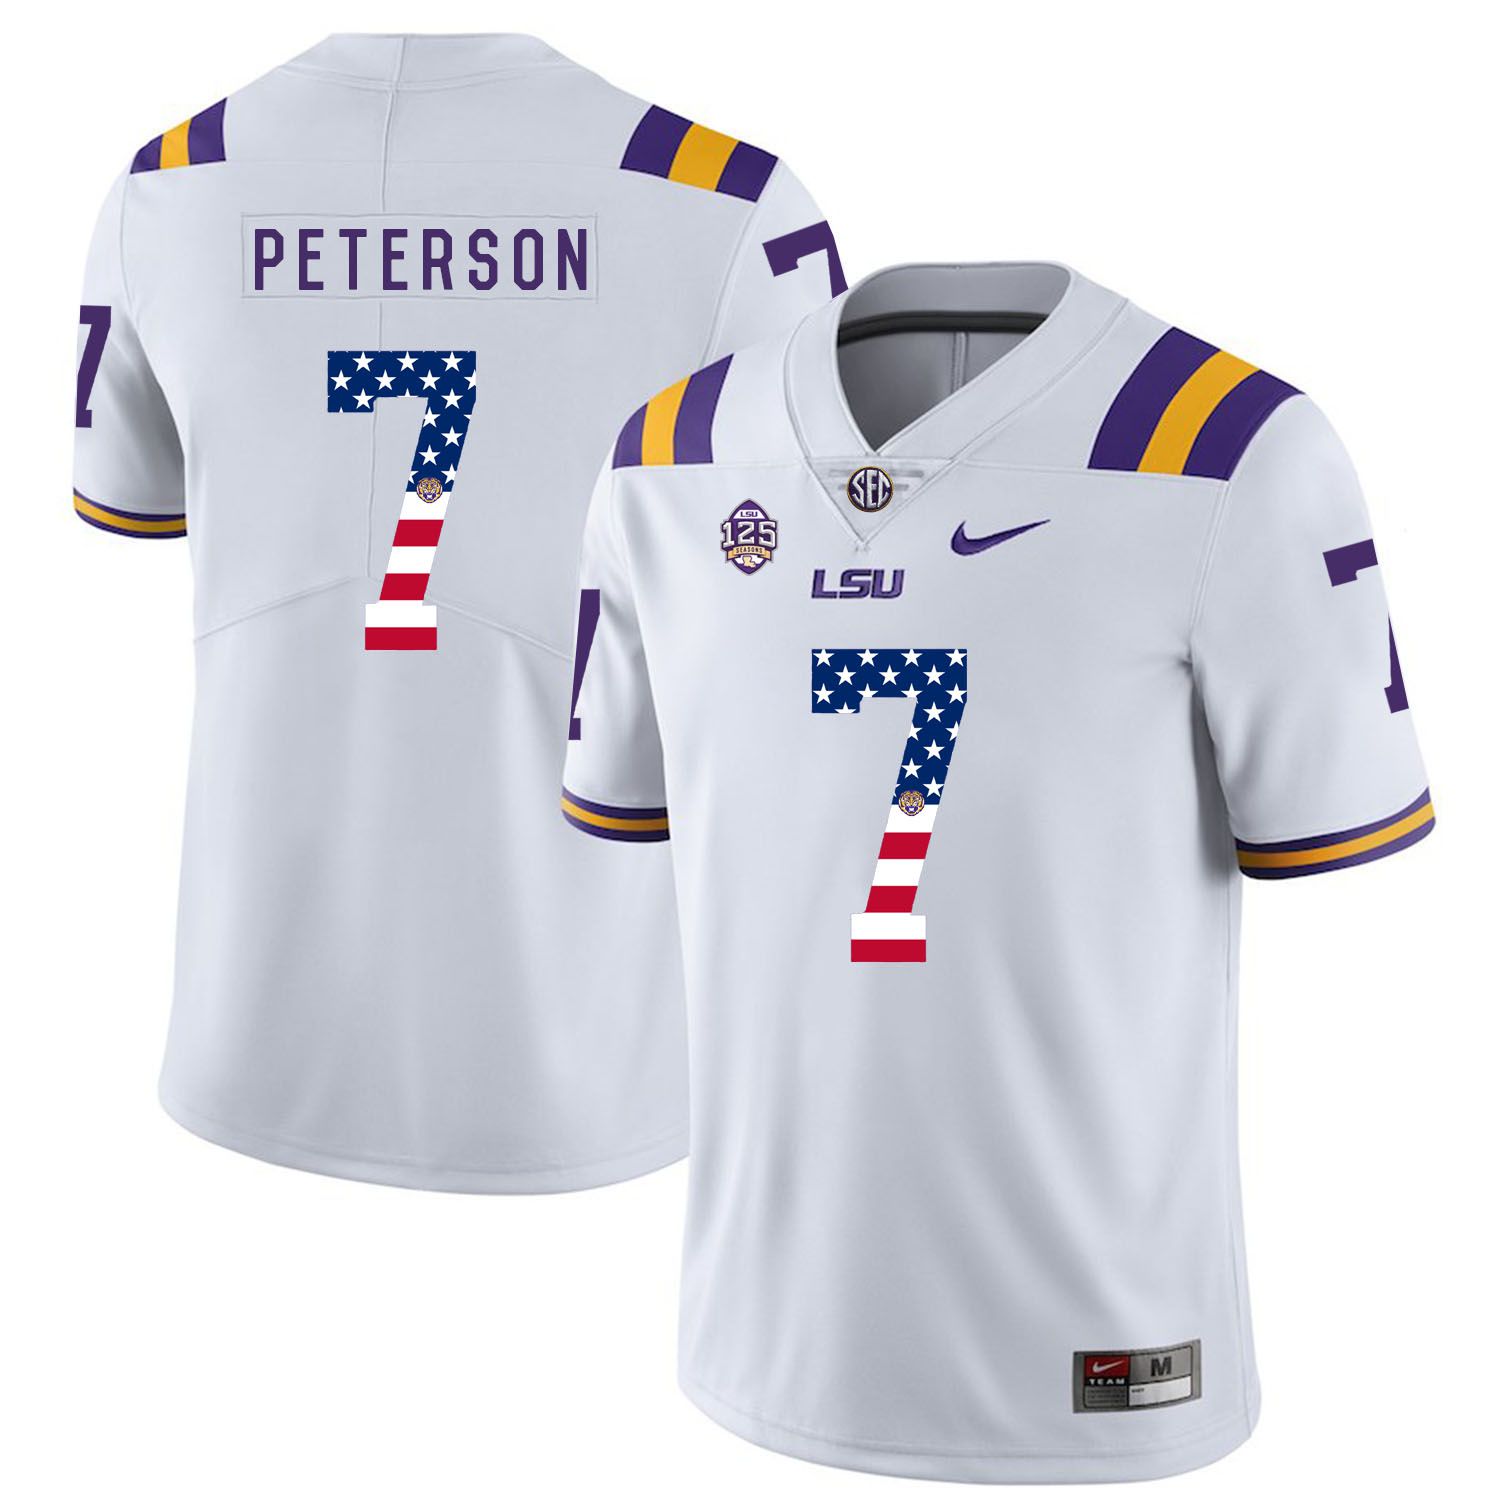 Men LSU Tigers #7 Peterson White Flag Customized NCAA Jerseys->customized ncaa jersey->Custom Jersey